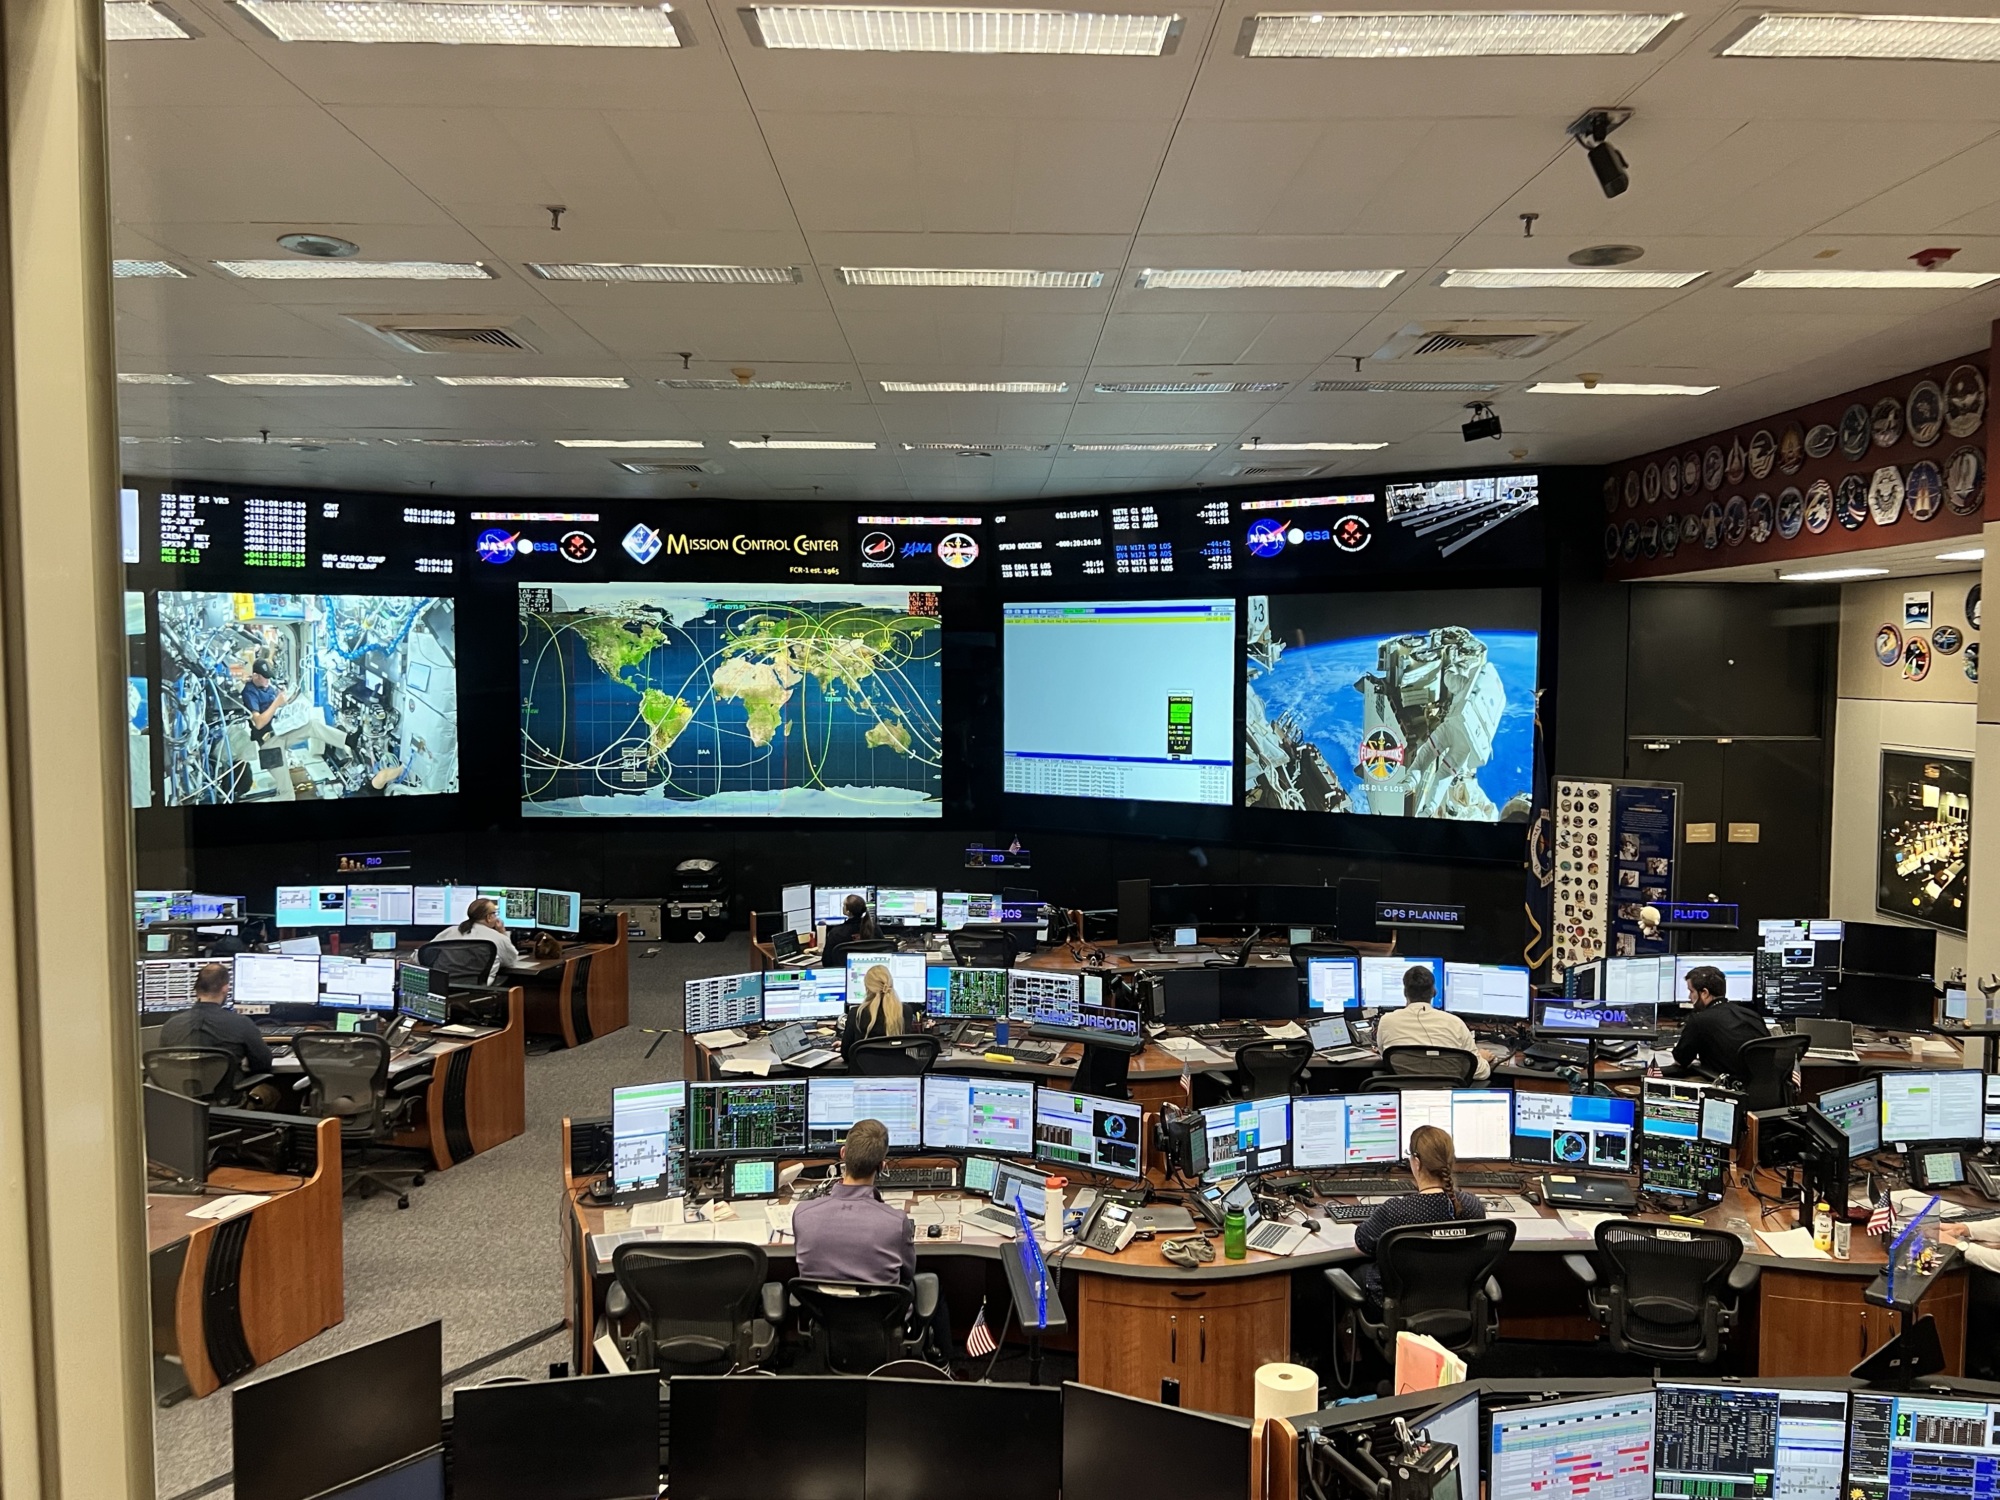 control center with four large screens